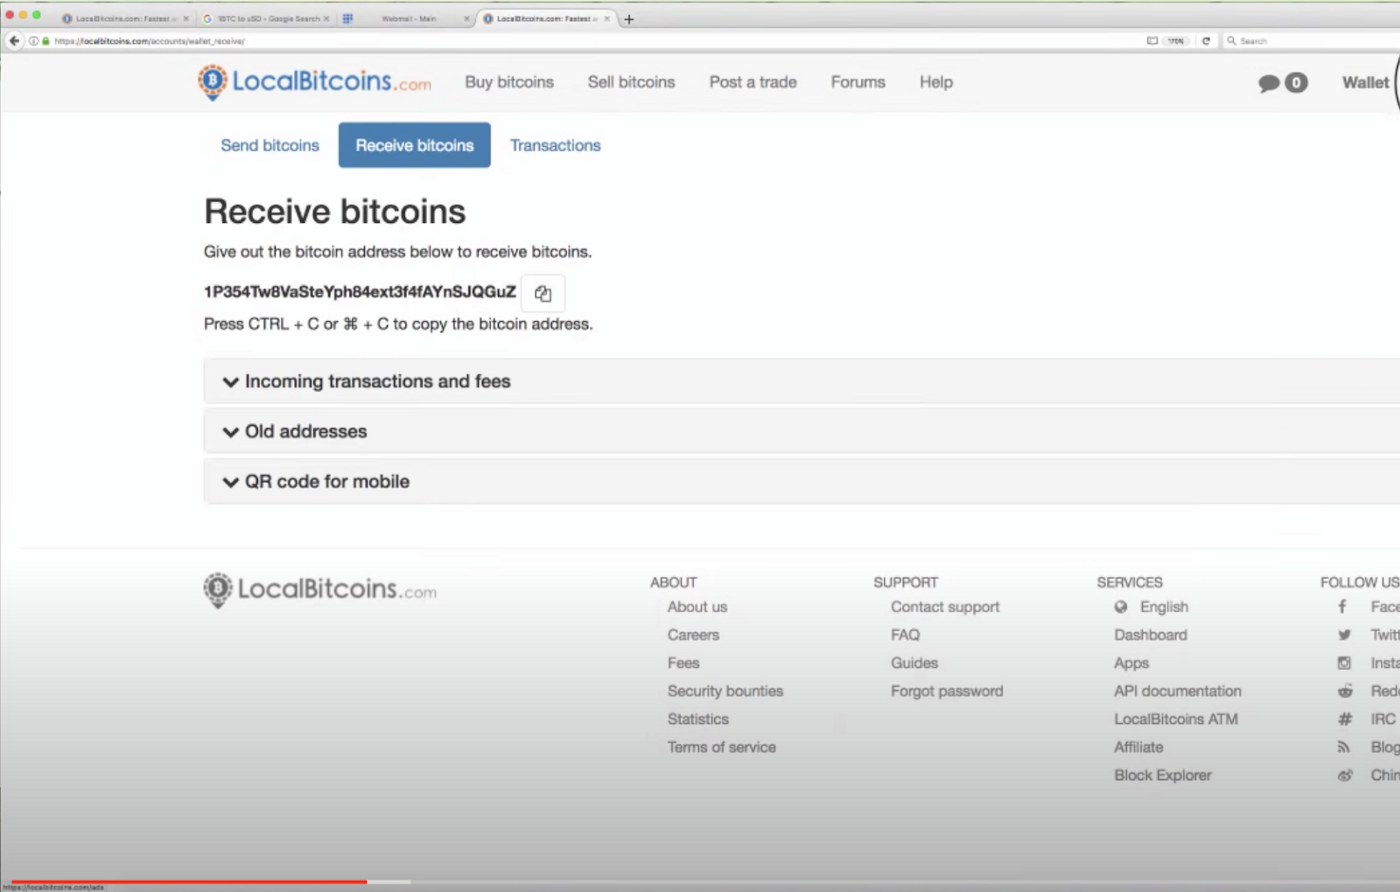 We know this address belongs to LocalBitcoins and is an individual’s deposit address